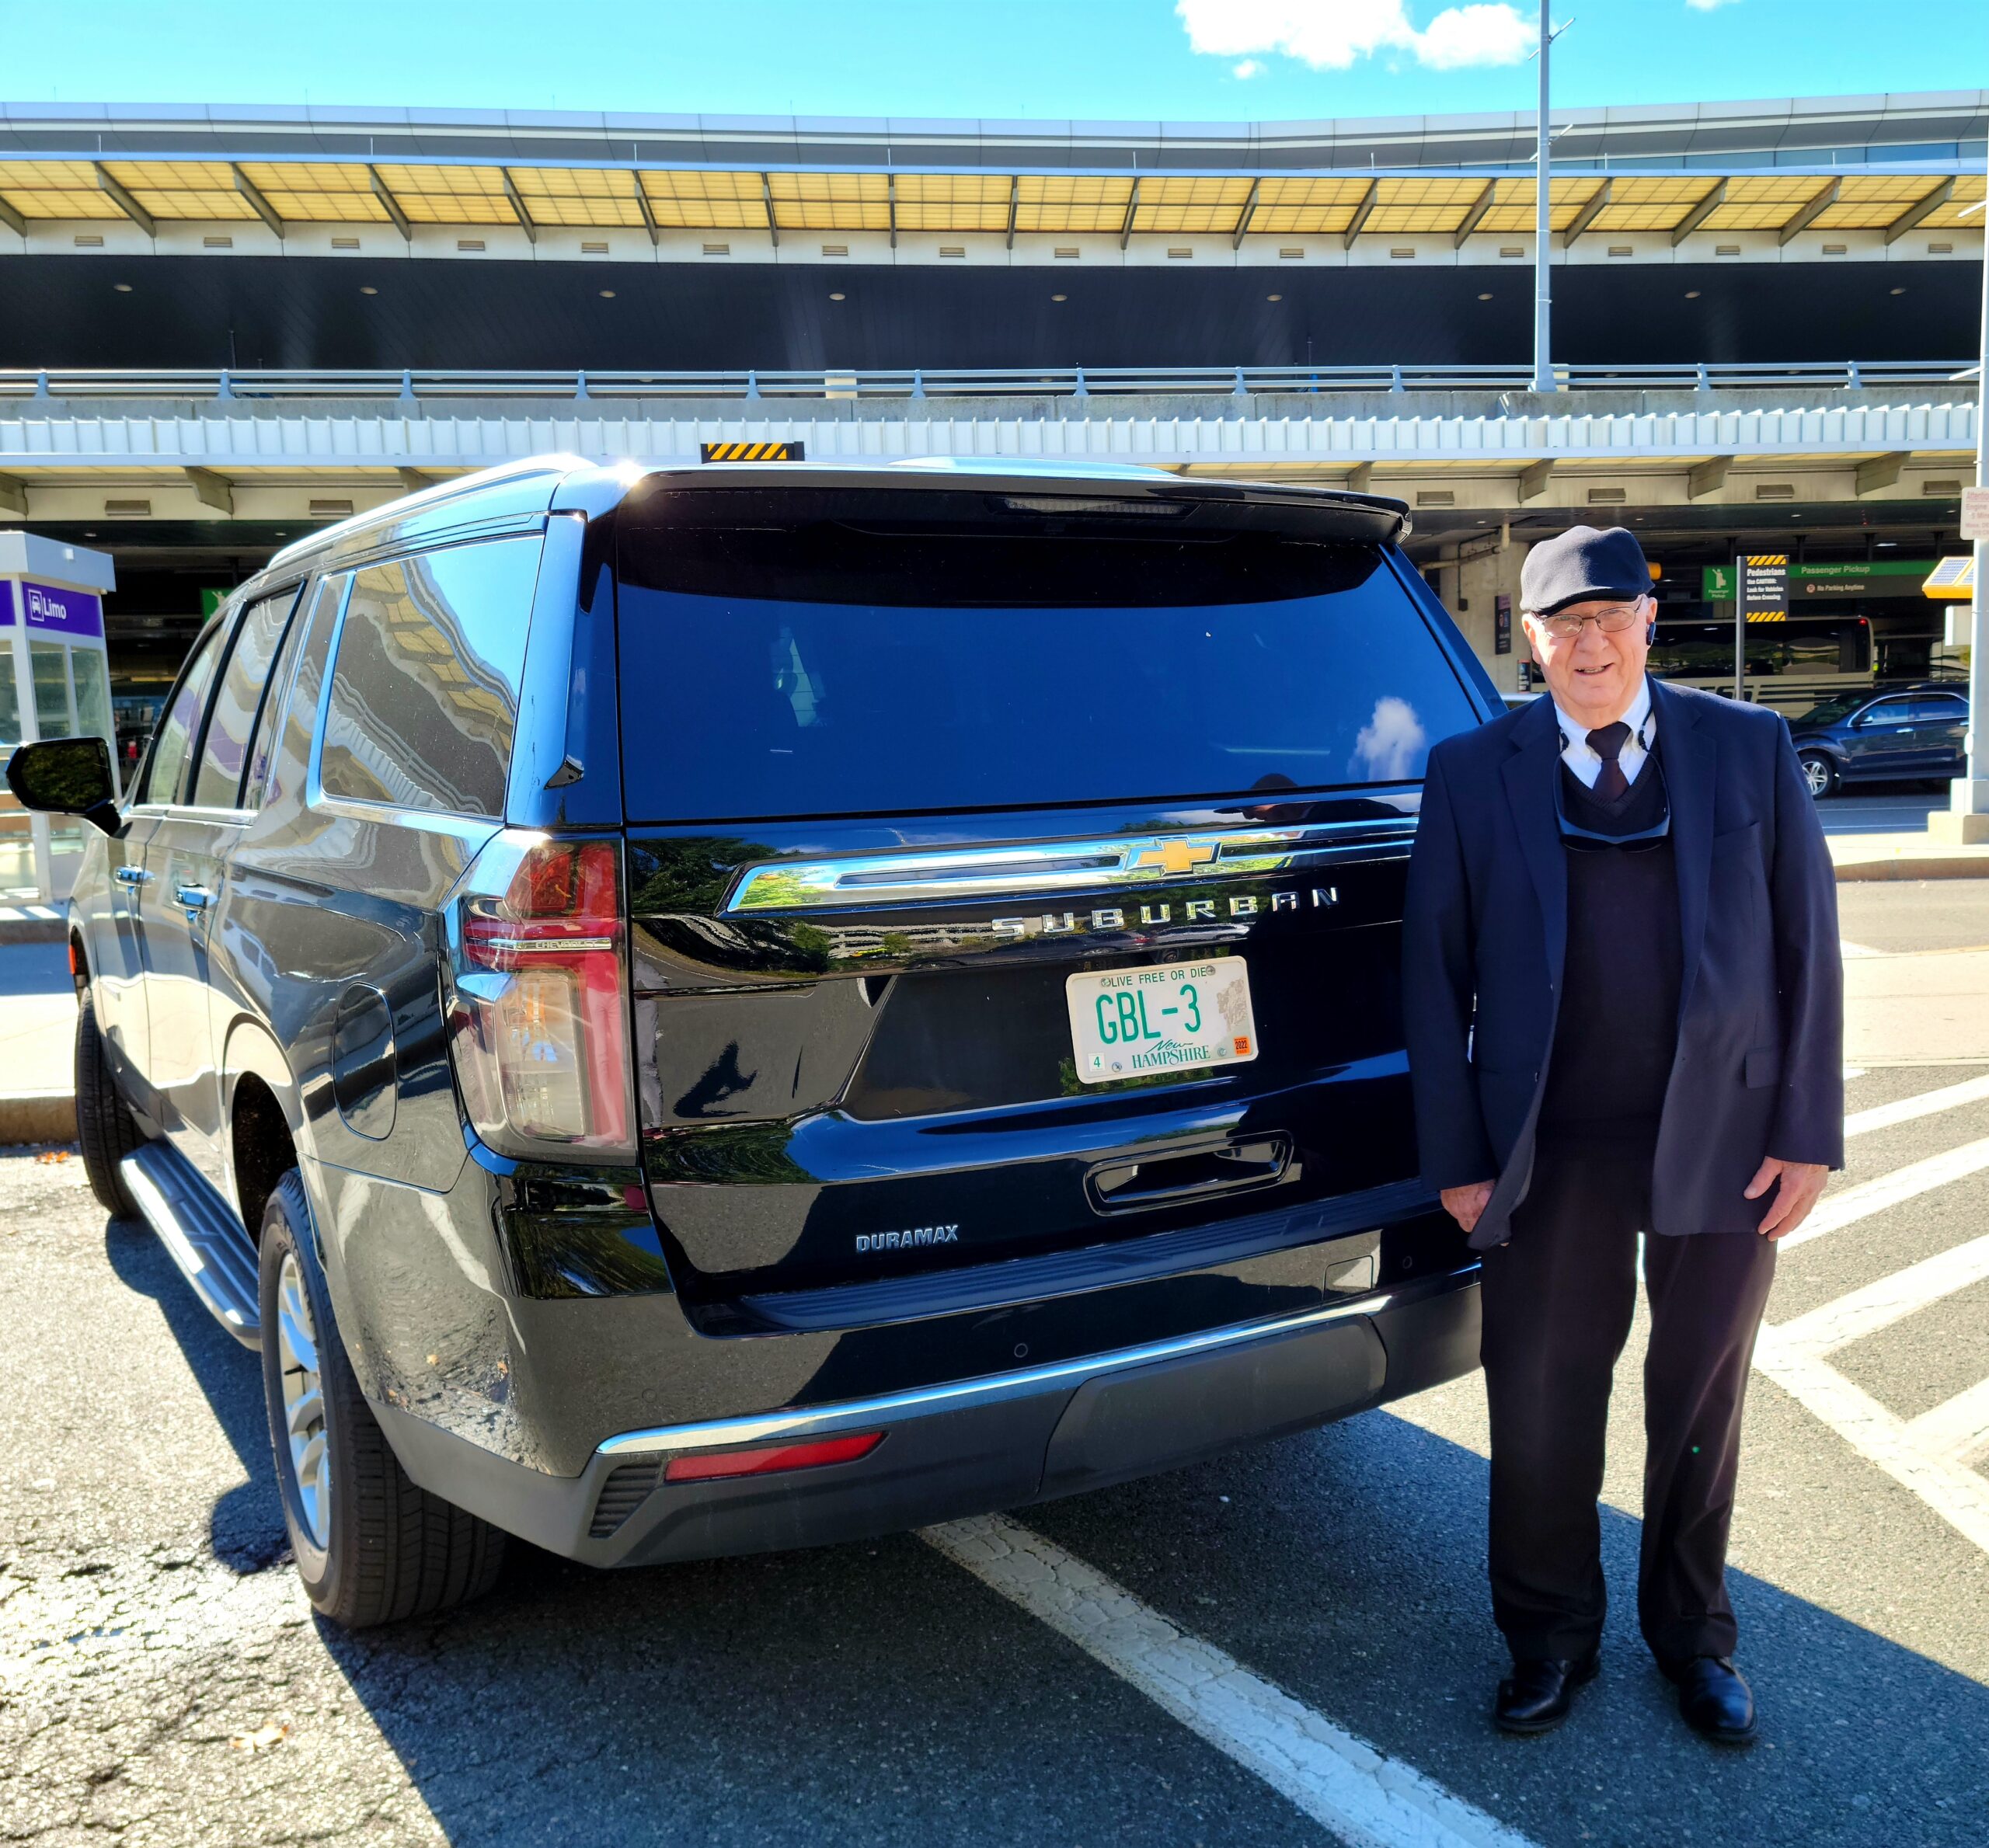 Go to the Airport with Great Bay Limo